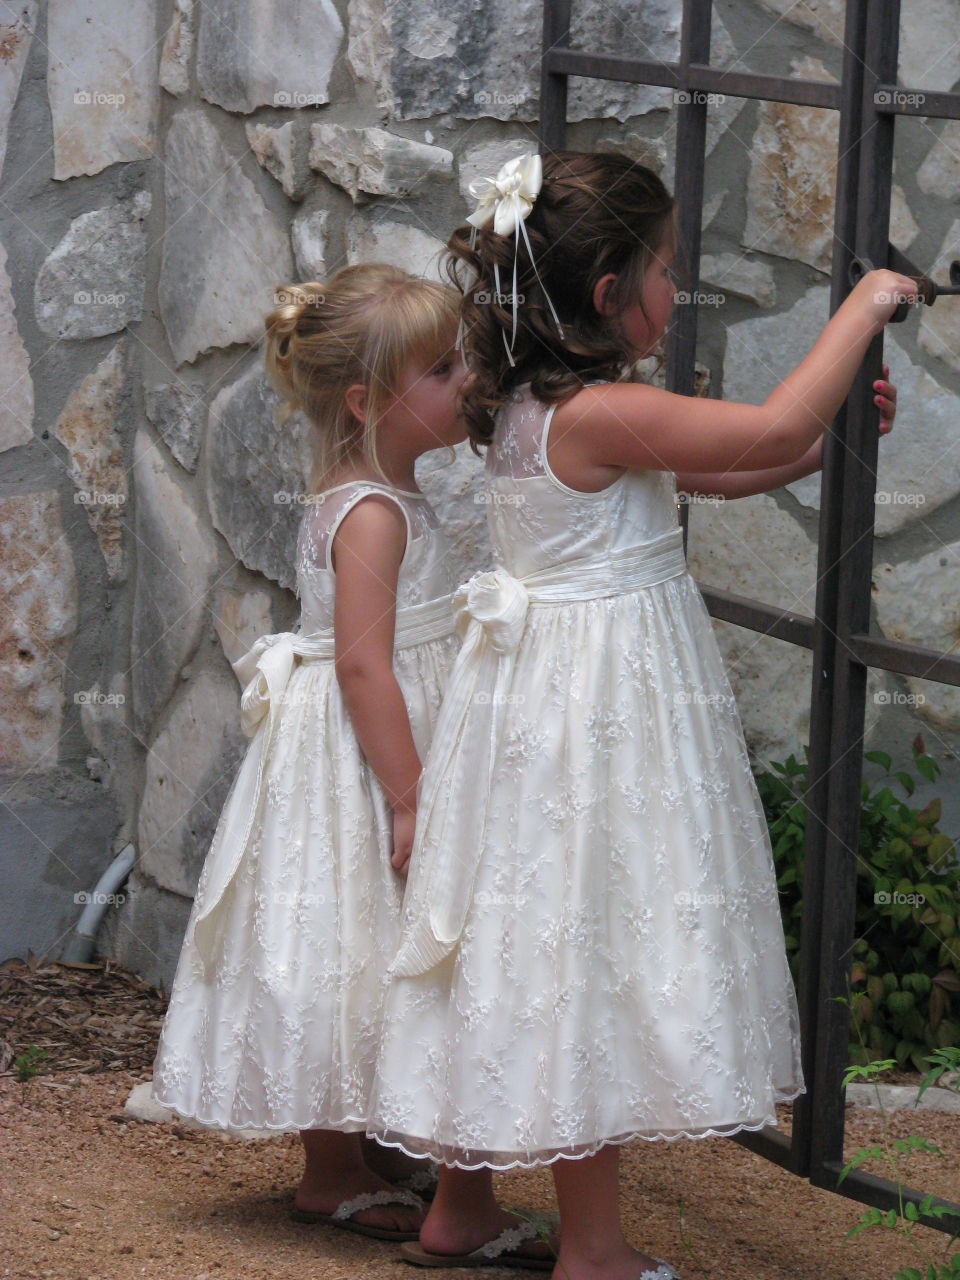 Girls just want to have fun. Girls playing at a wedding